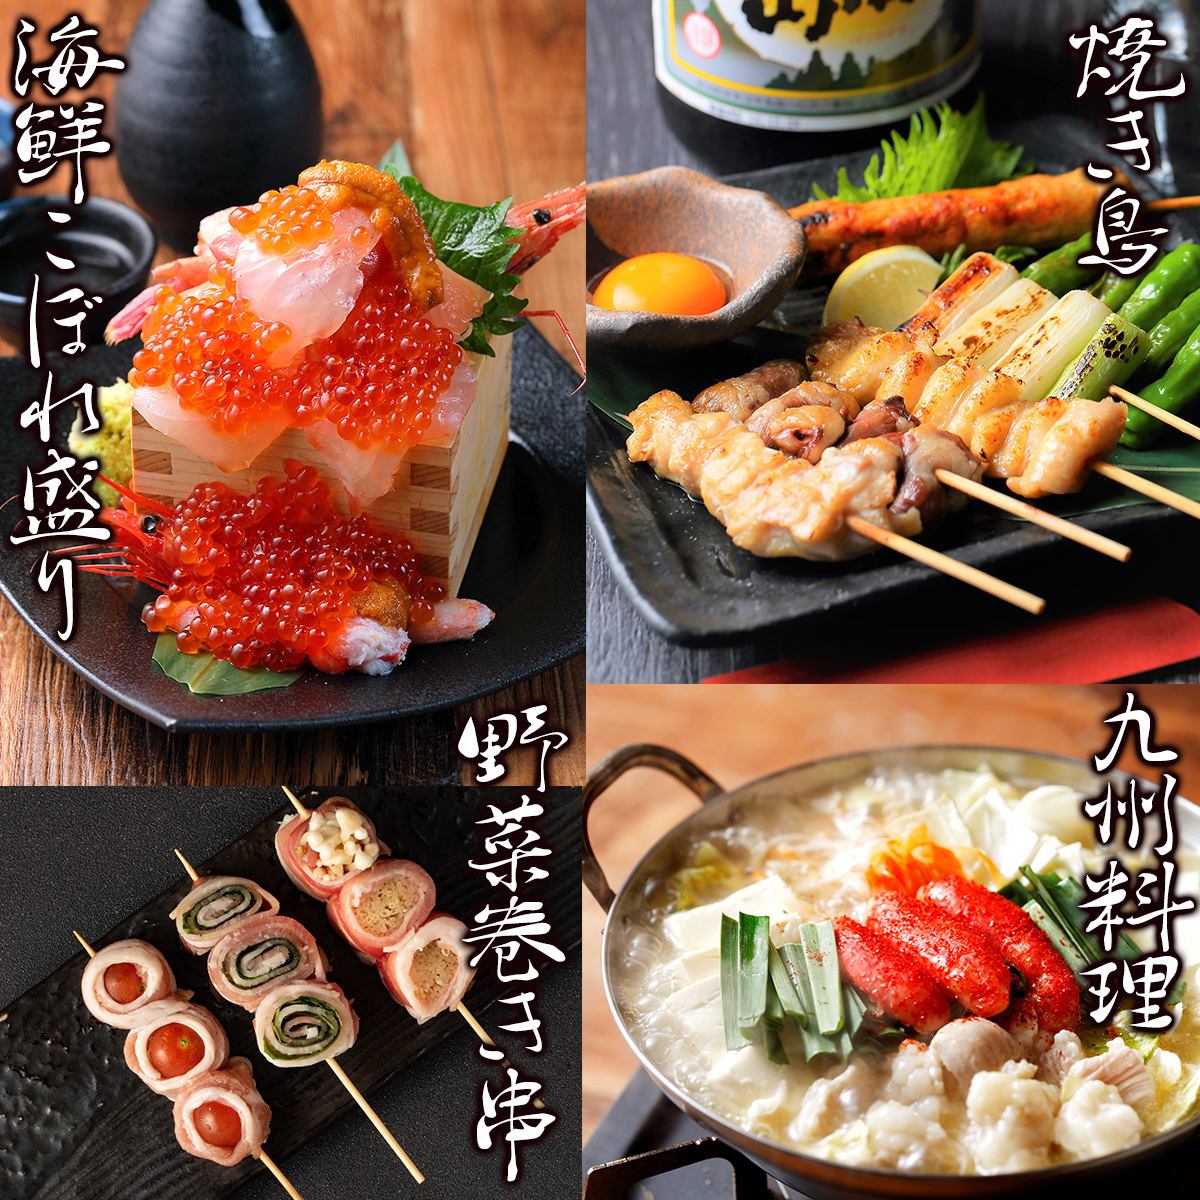 We are proud of our seafood spills, yakitori, vegetable skewers, and Kyushu cuisine.